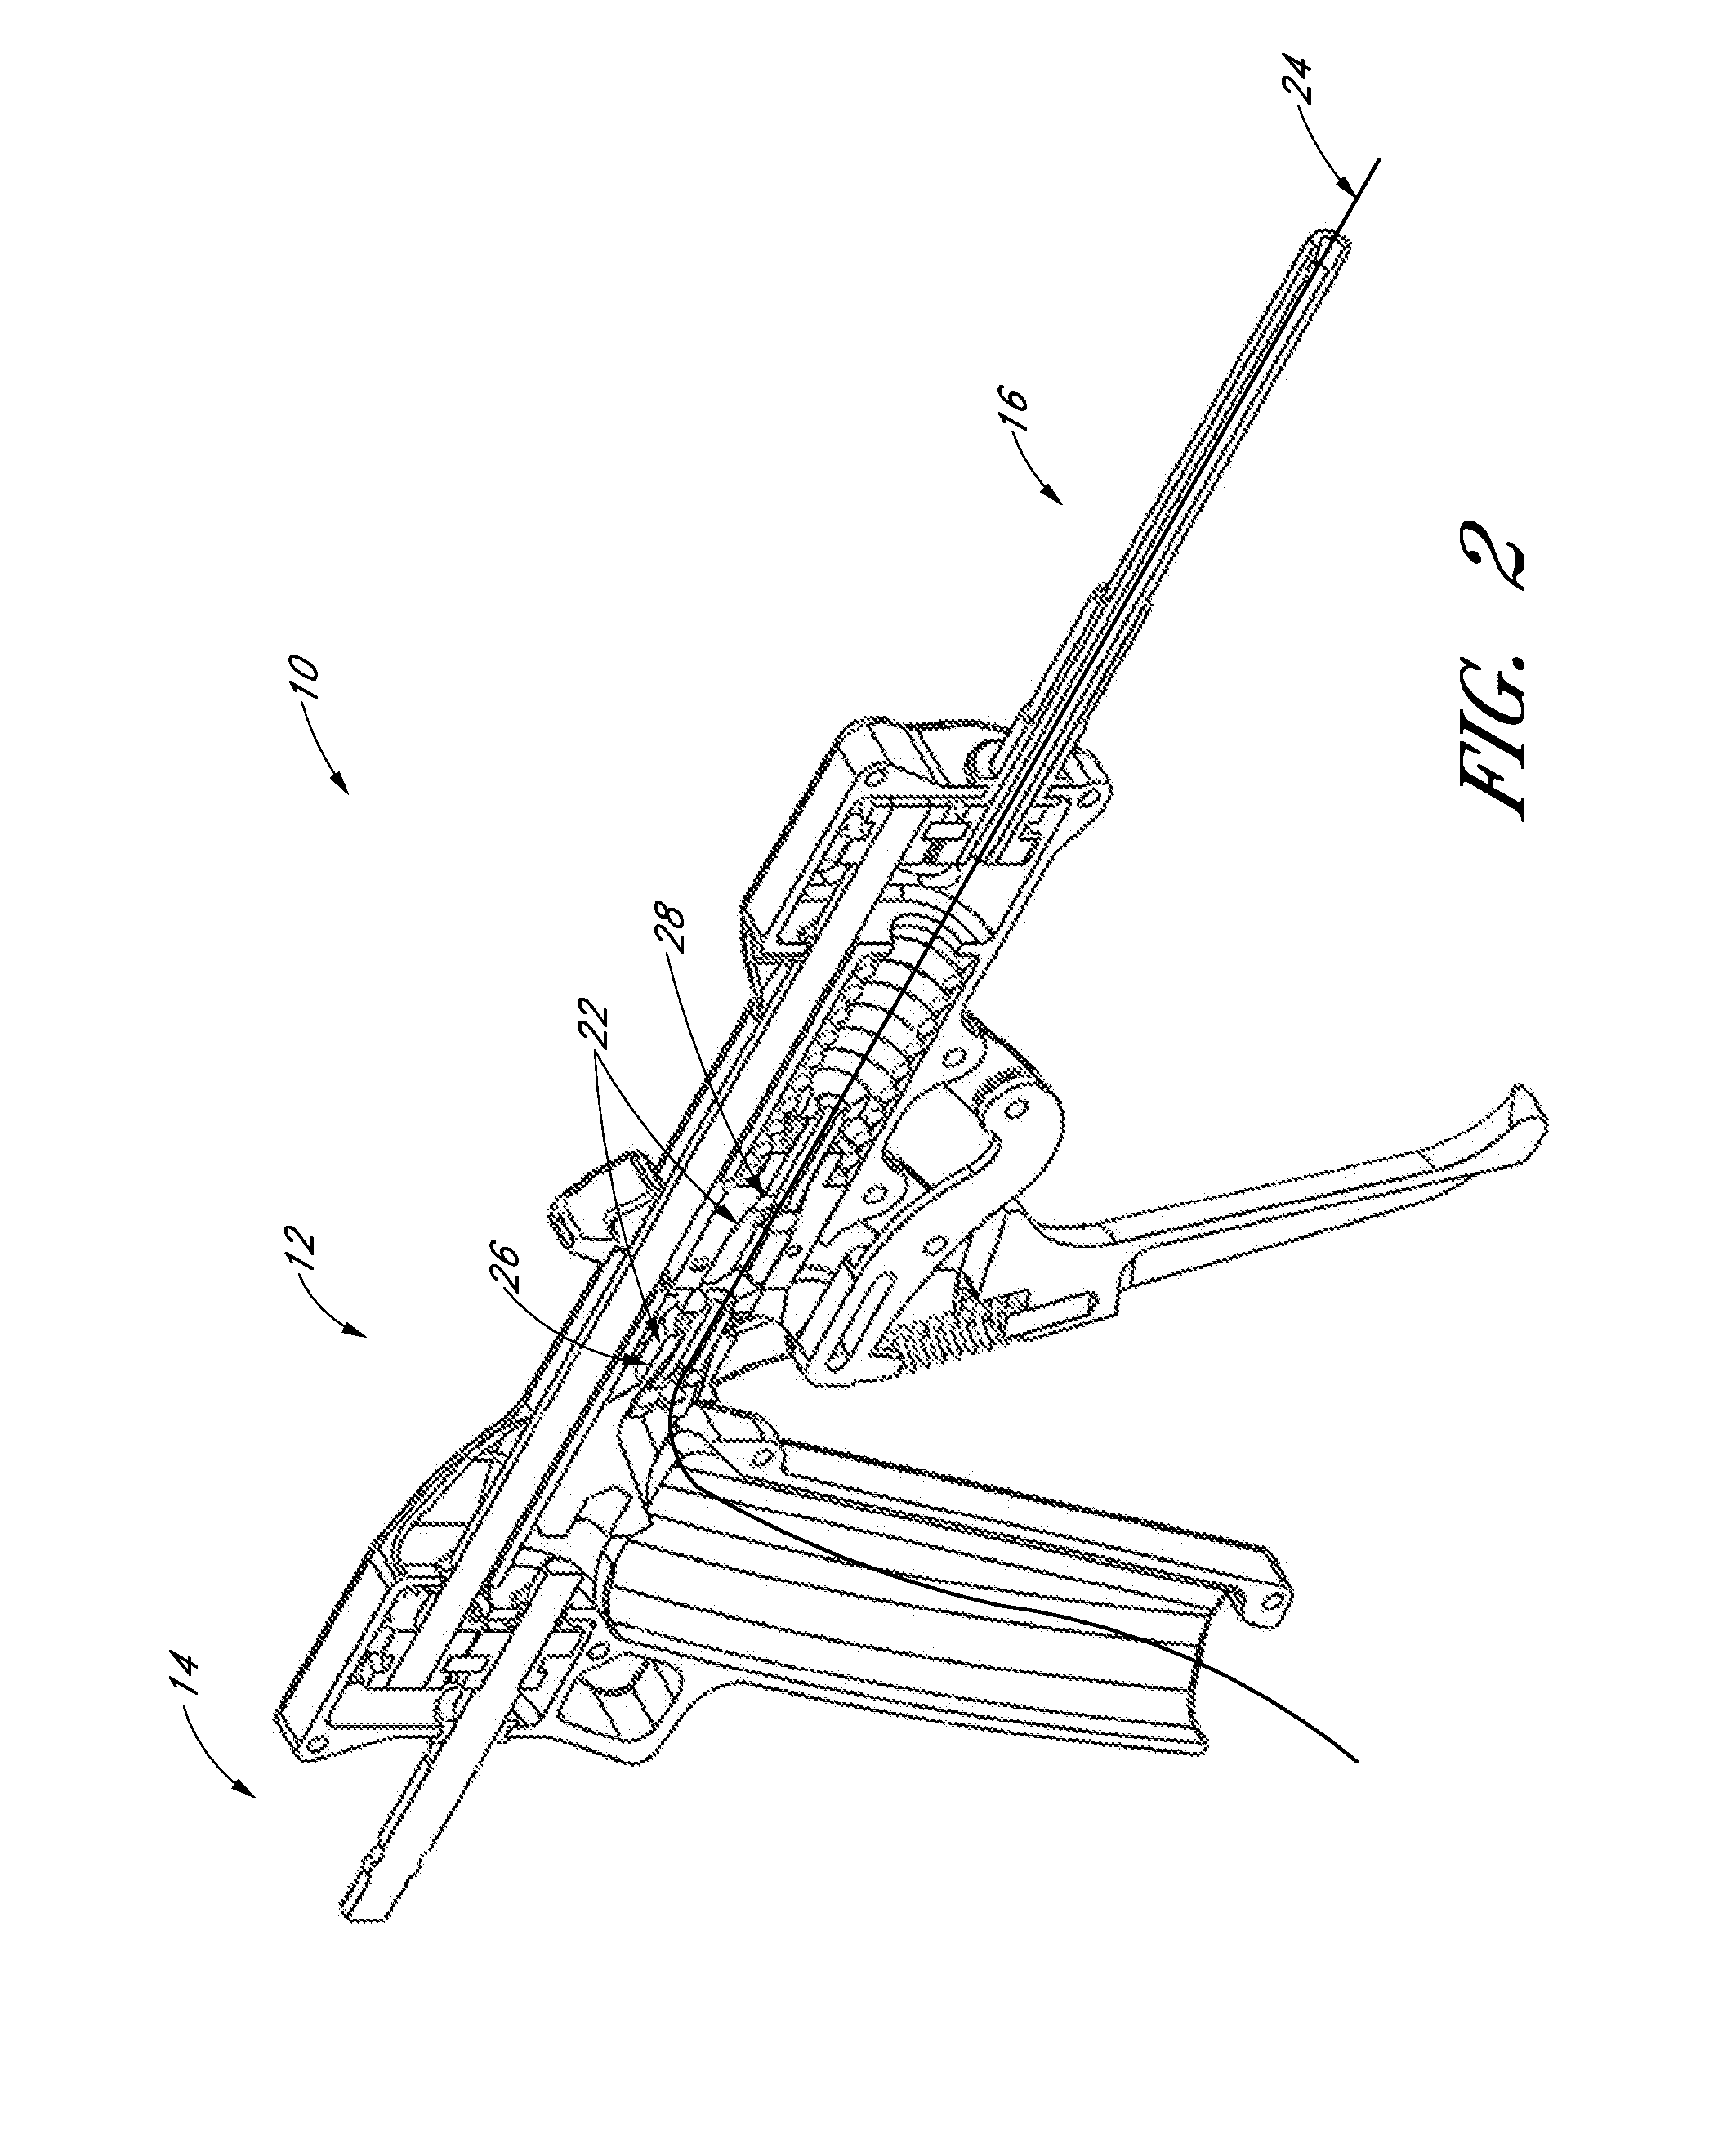 Device and method for tensioning an elongate member